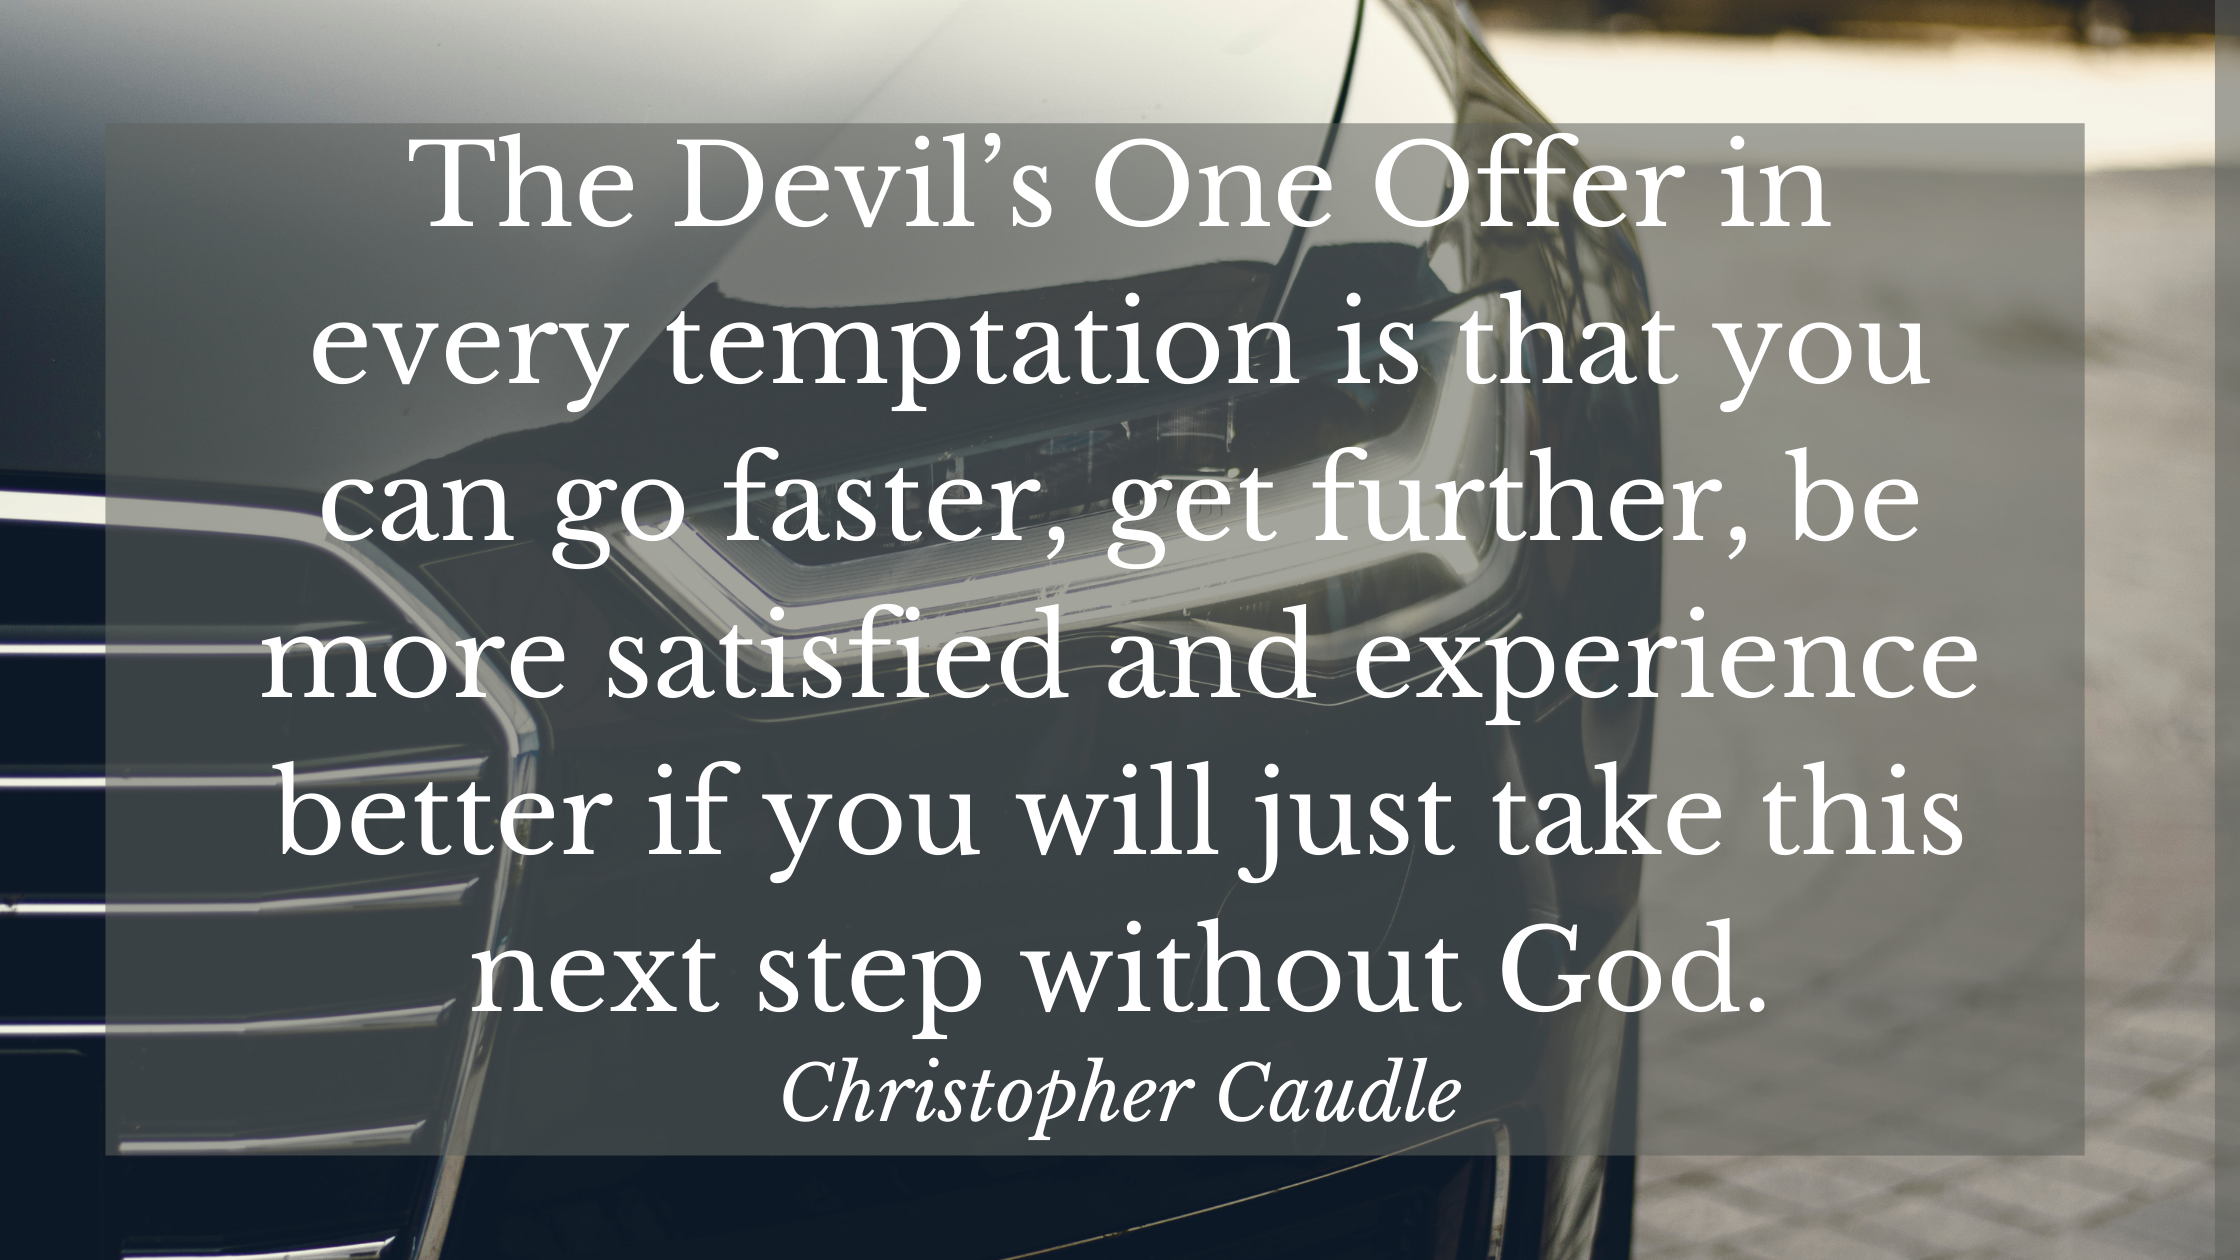 The Devil’s One Offer in every temptation is that you can go faster, get further, be more satisfied and experience better if you will just take this n